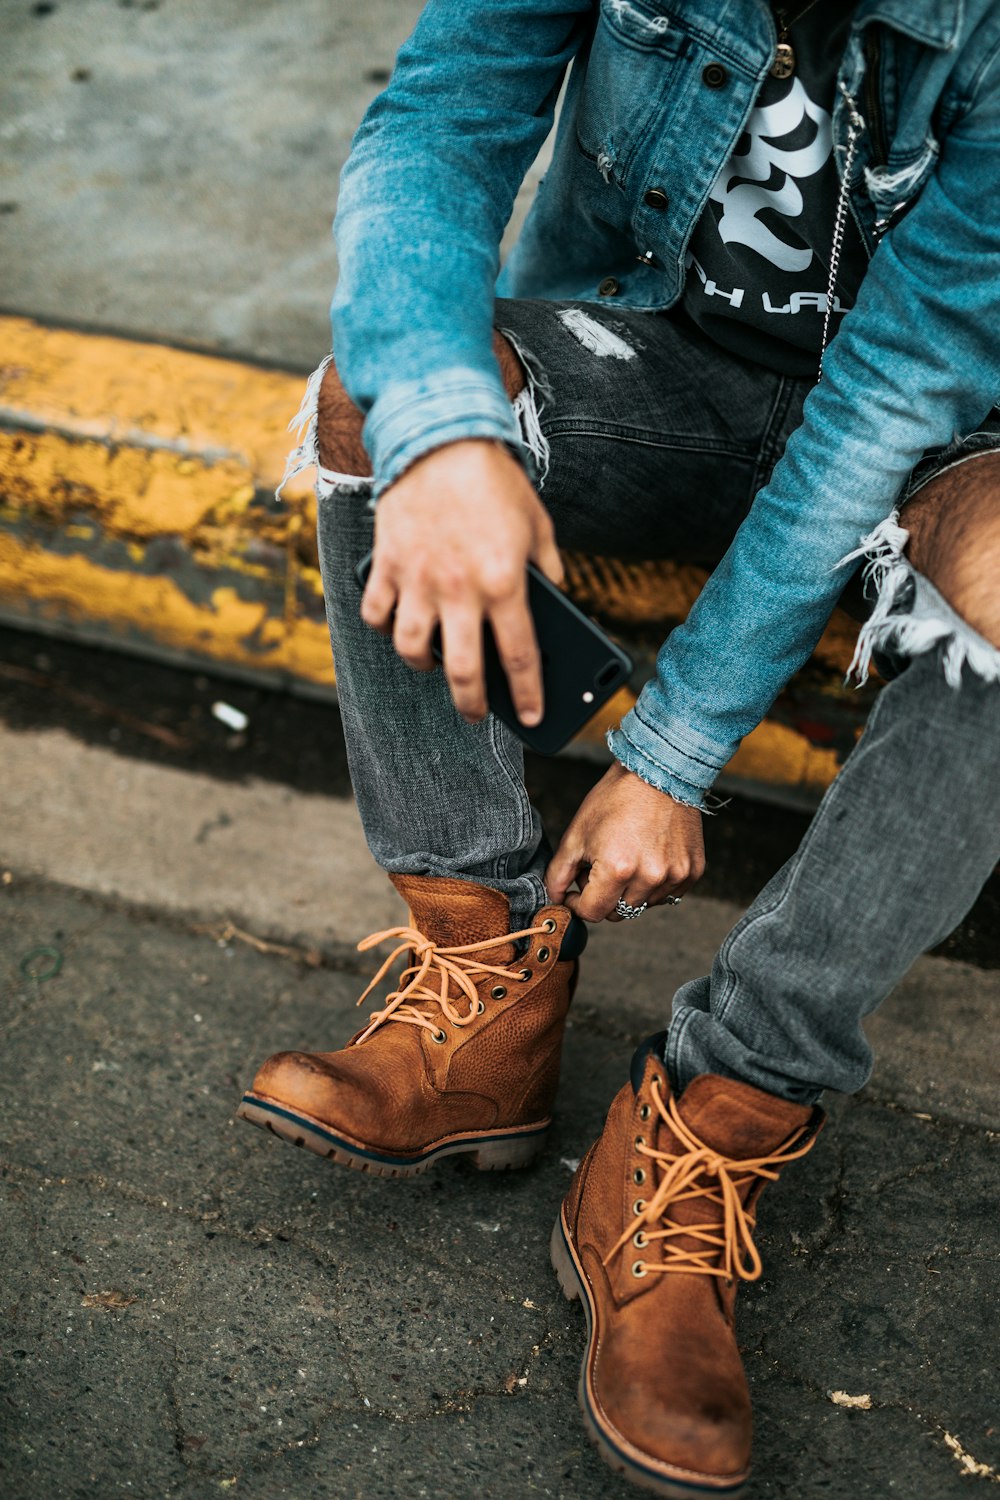 person wearing pair of brown boots, distressed fitted jeans, and denim jacket